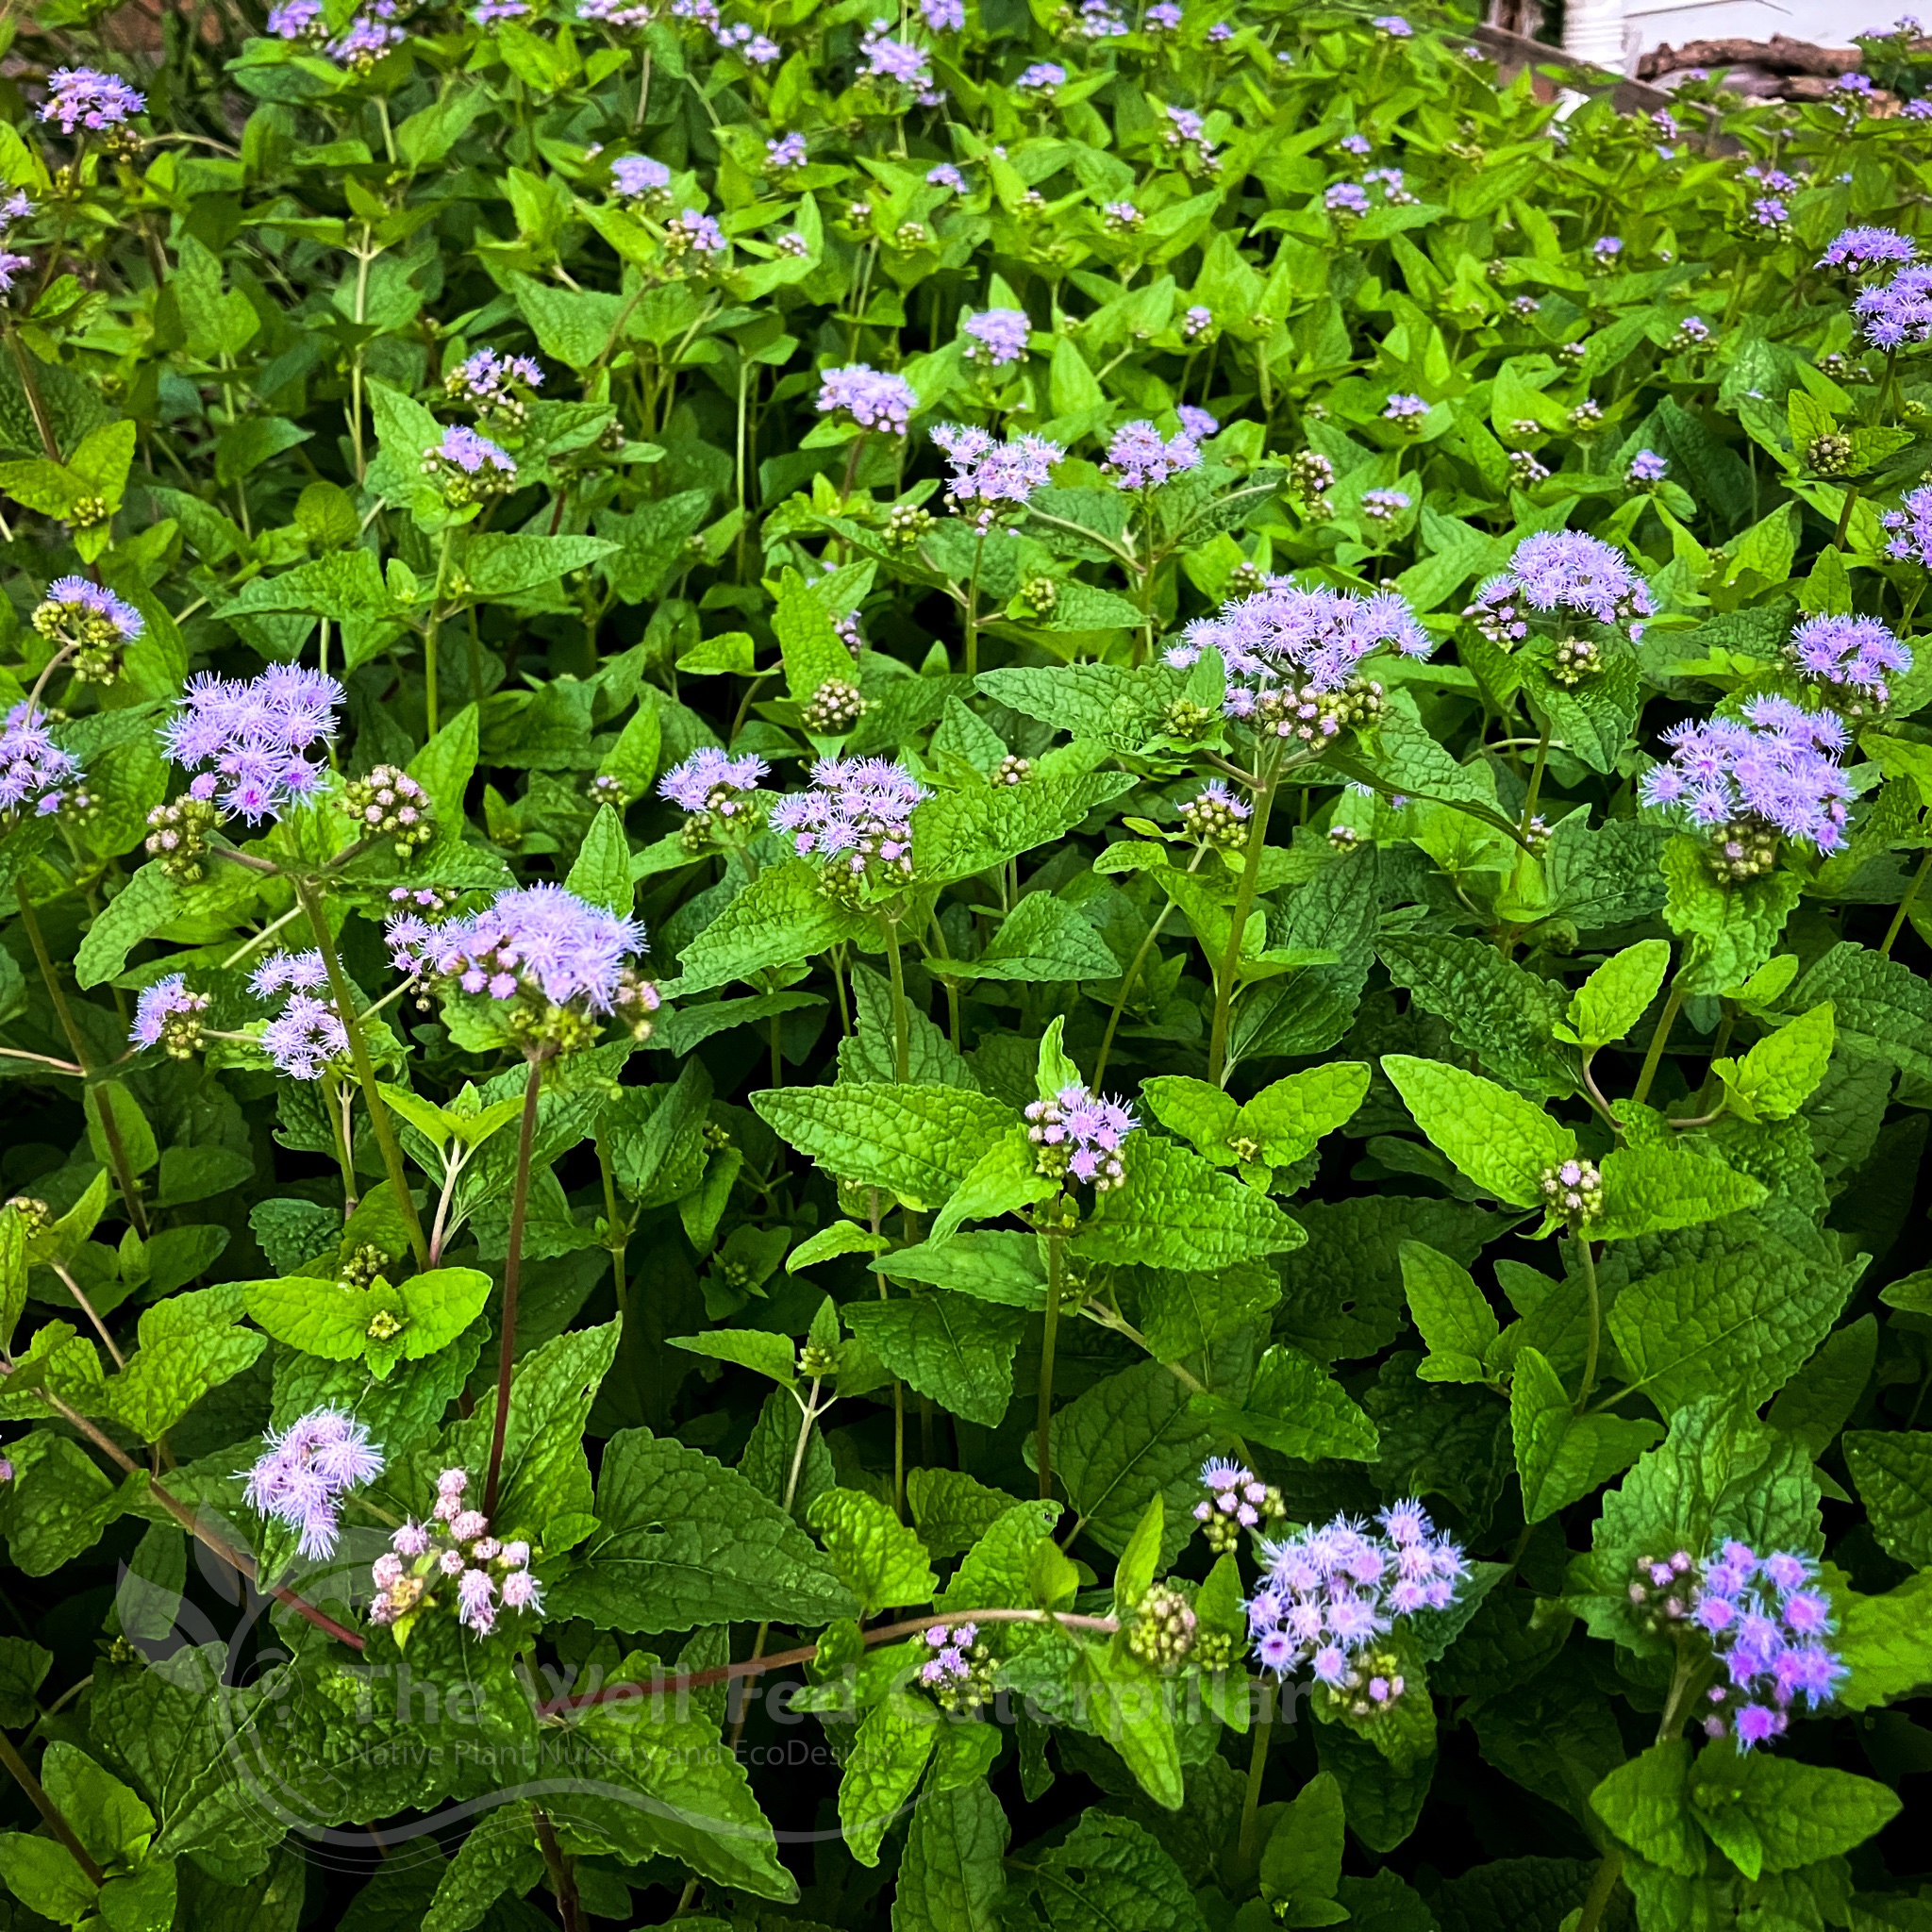 A close crop photo of plants with lush, green leaves, and small, spiky purple flowers. Photo from the Well Fed Caterpillar Facebook page.